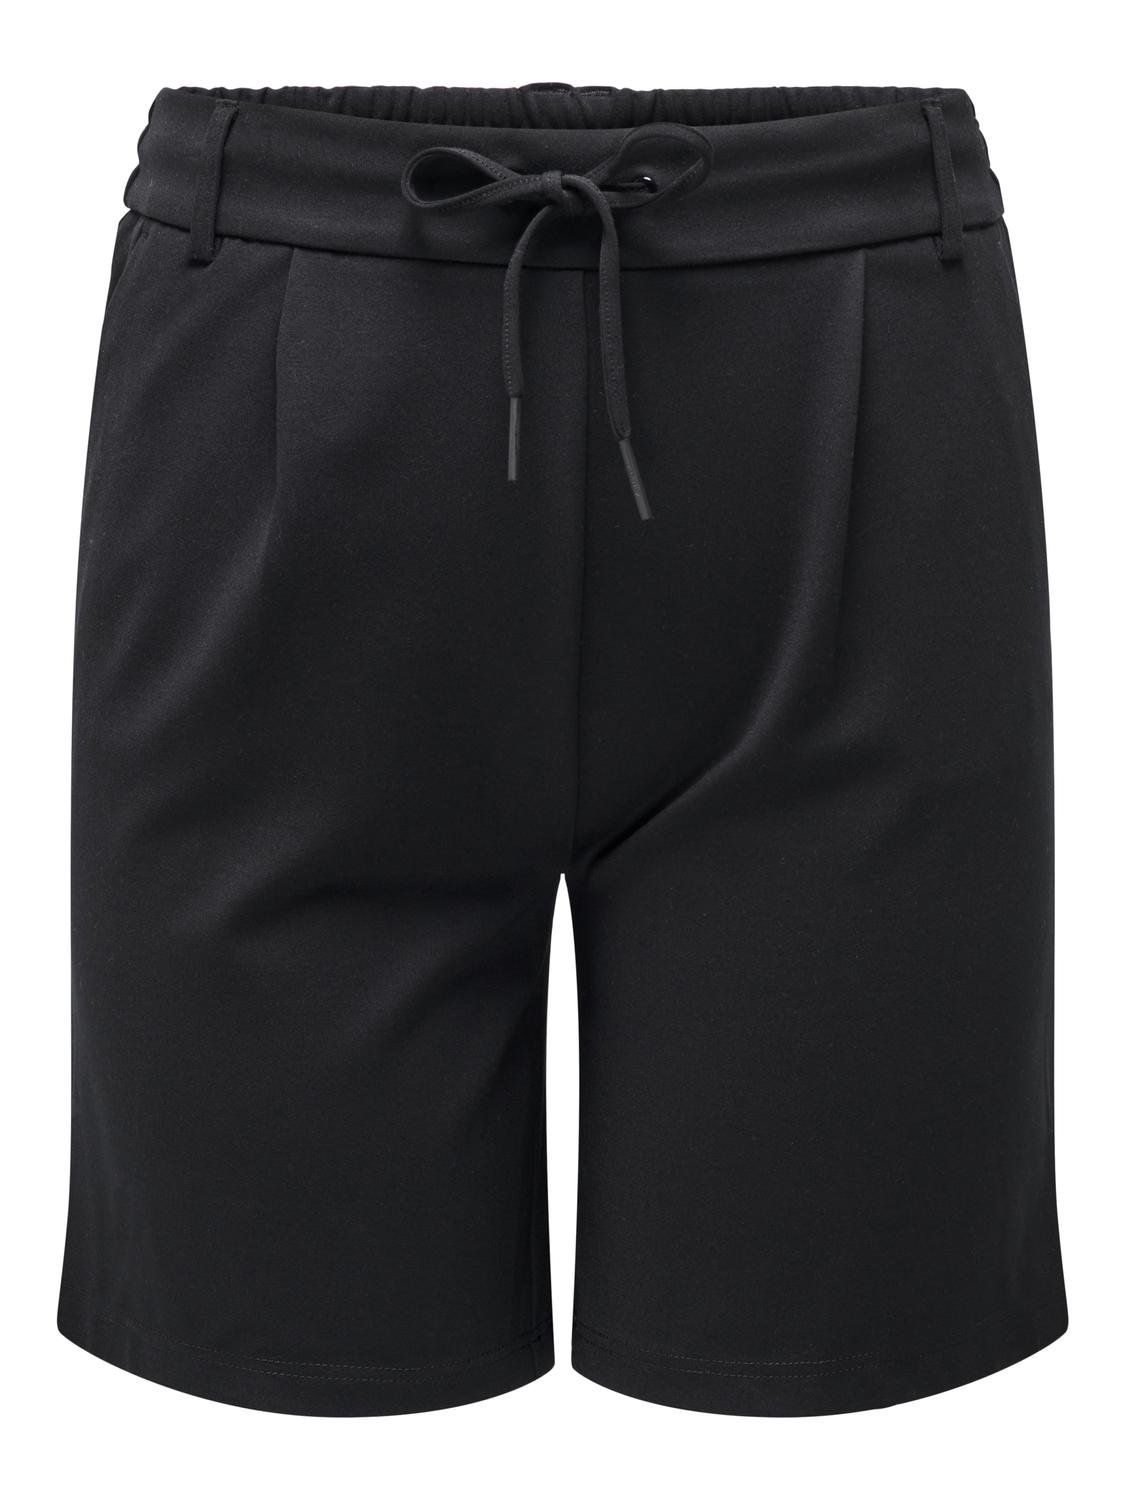 ONLY Normal passform Shorts -Black - 15293187